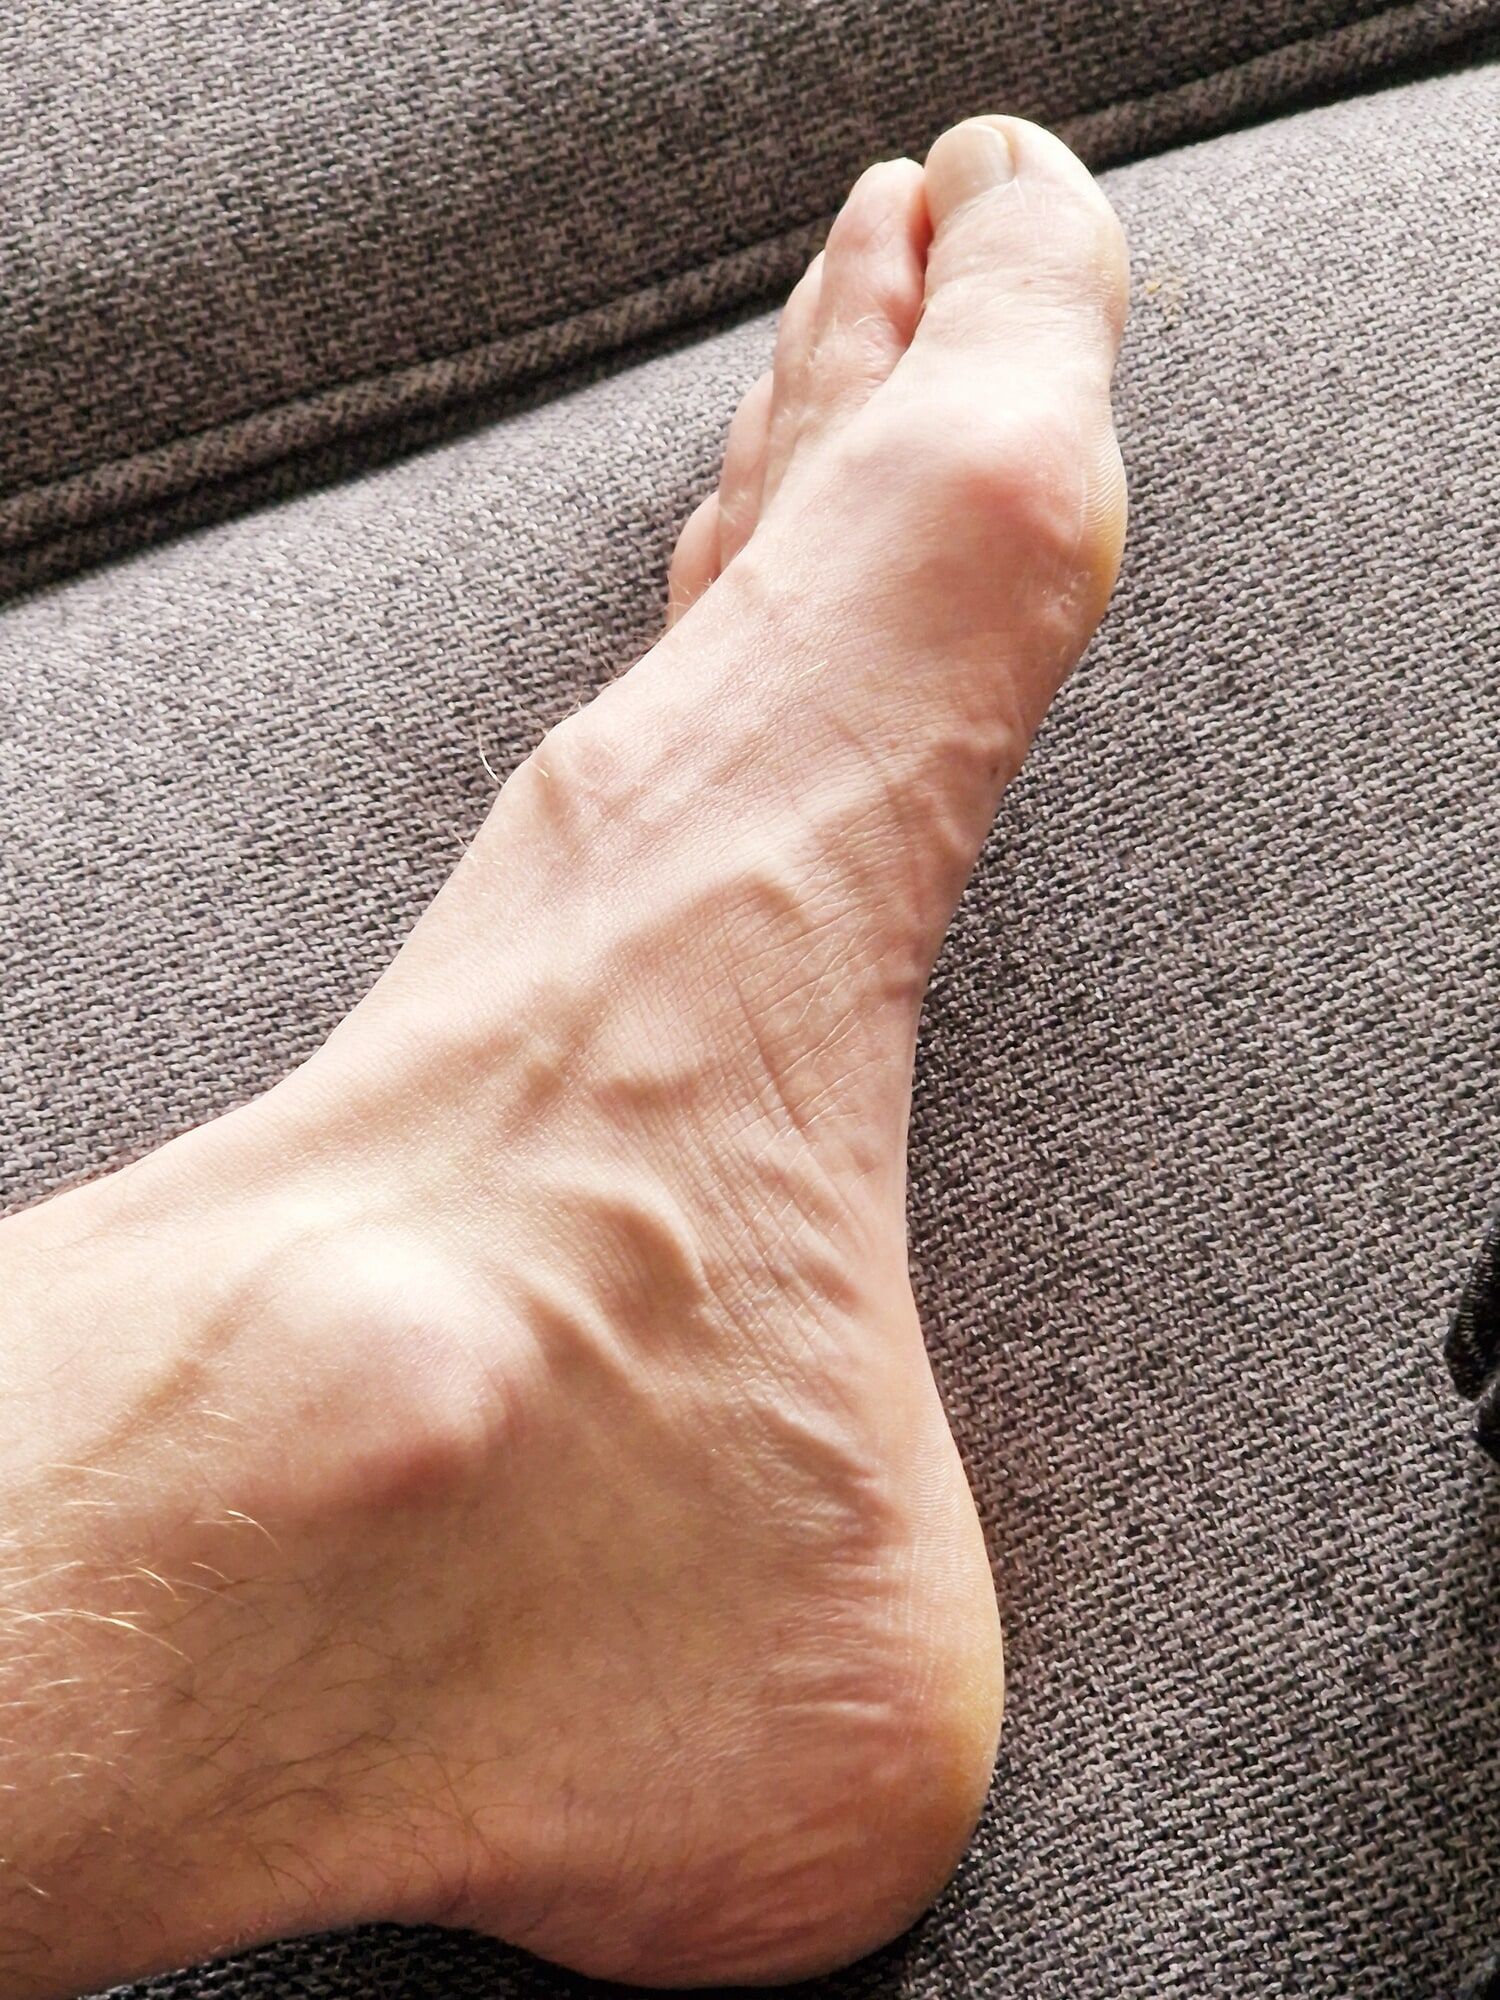 For foot the foot lover, my first foot post #4